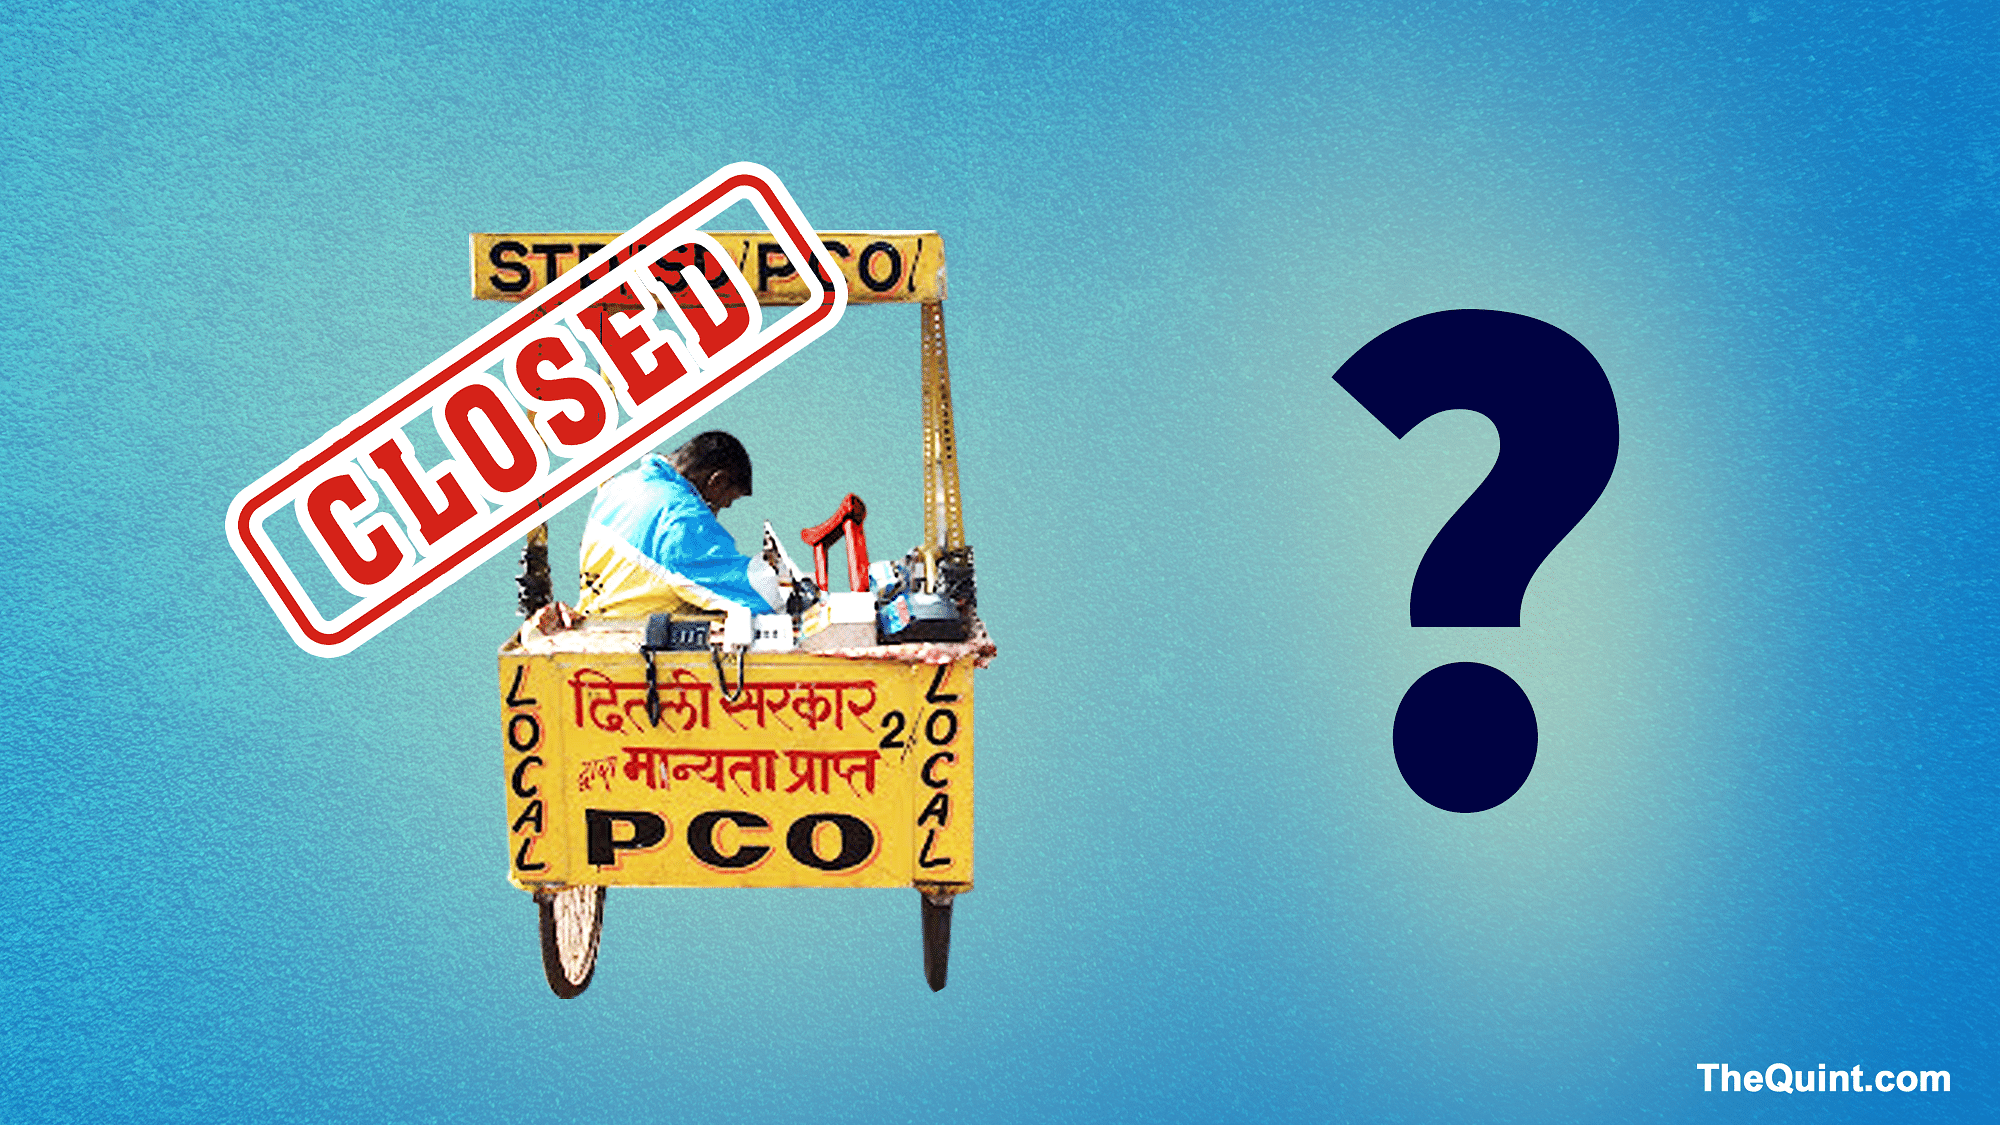 These STD/PCO booths are getting sealed. (Graphic: <b>The Quint</b>)